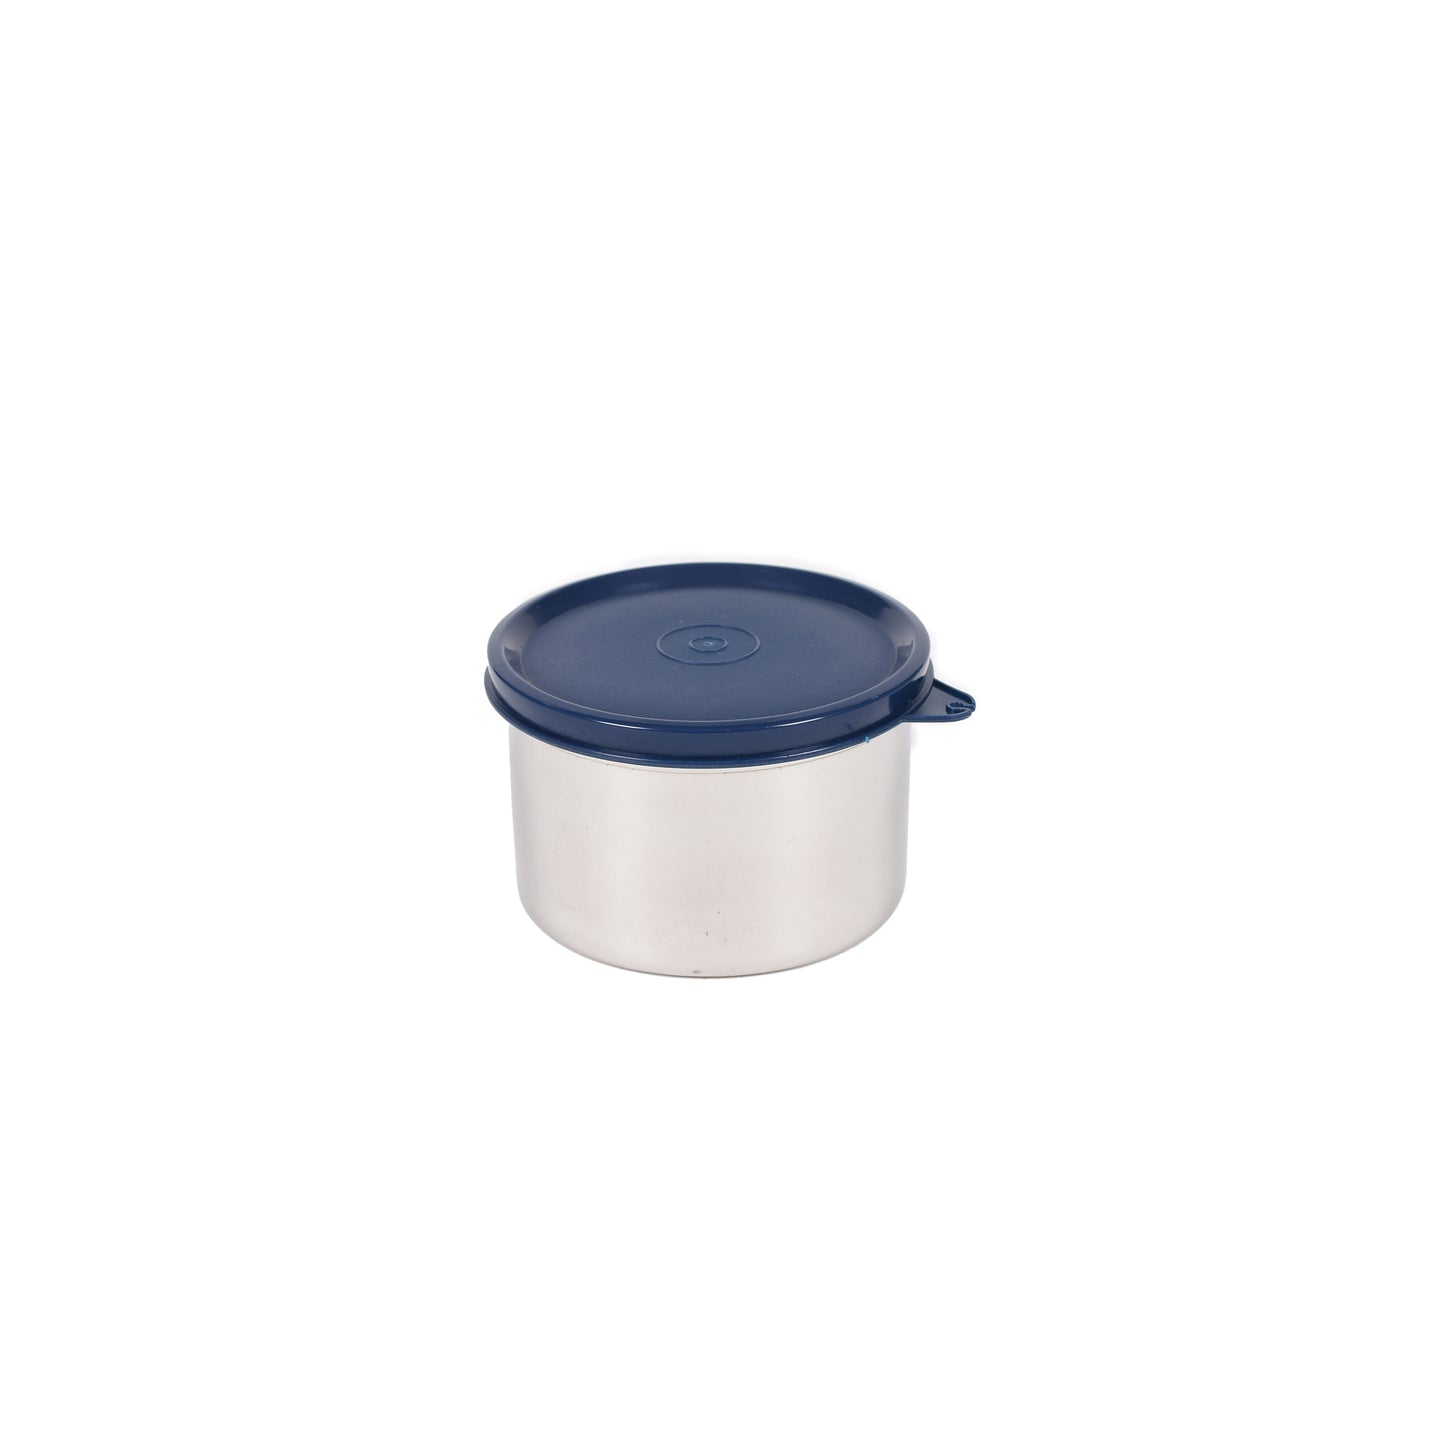 Oliveware - Absolute Stainless Steel Lunch Box Set Of 3Pcs (2Pcs-600ML+1Pc-450ML) Navy Blue - Ghar Sajawat